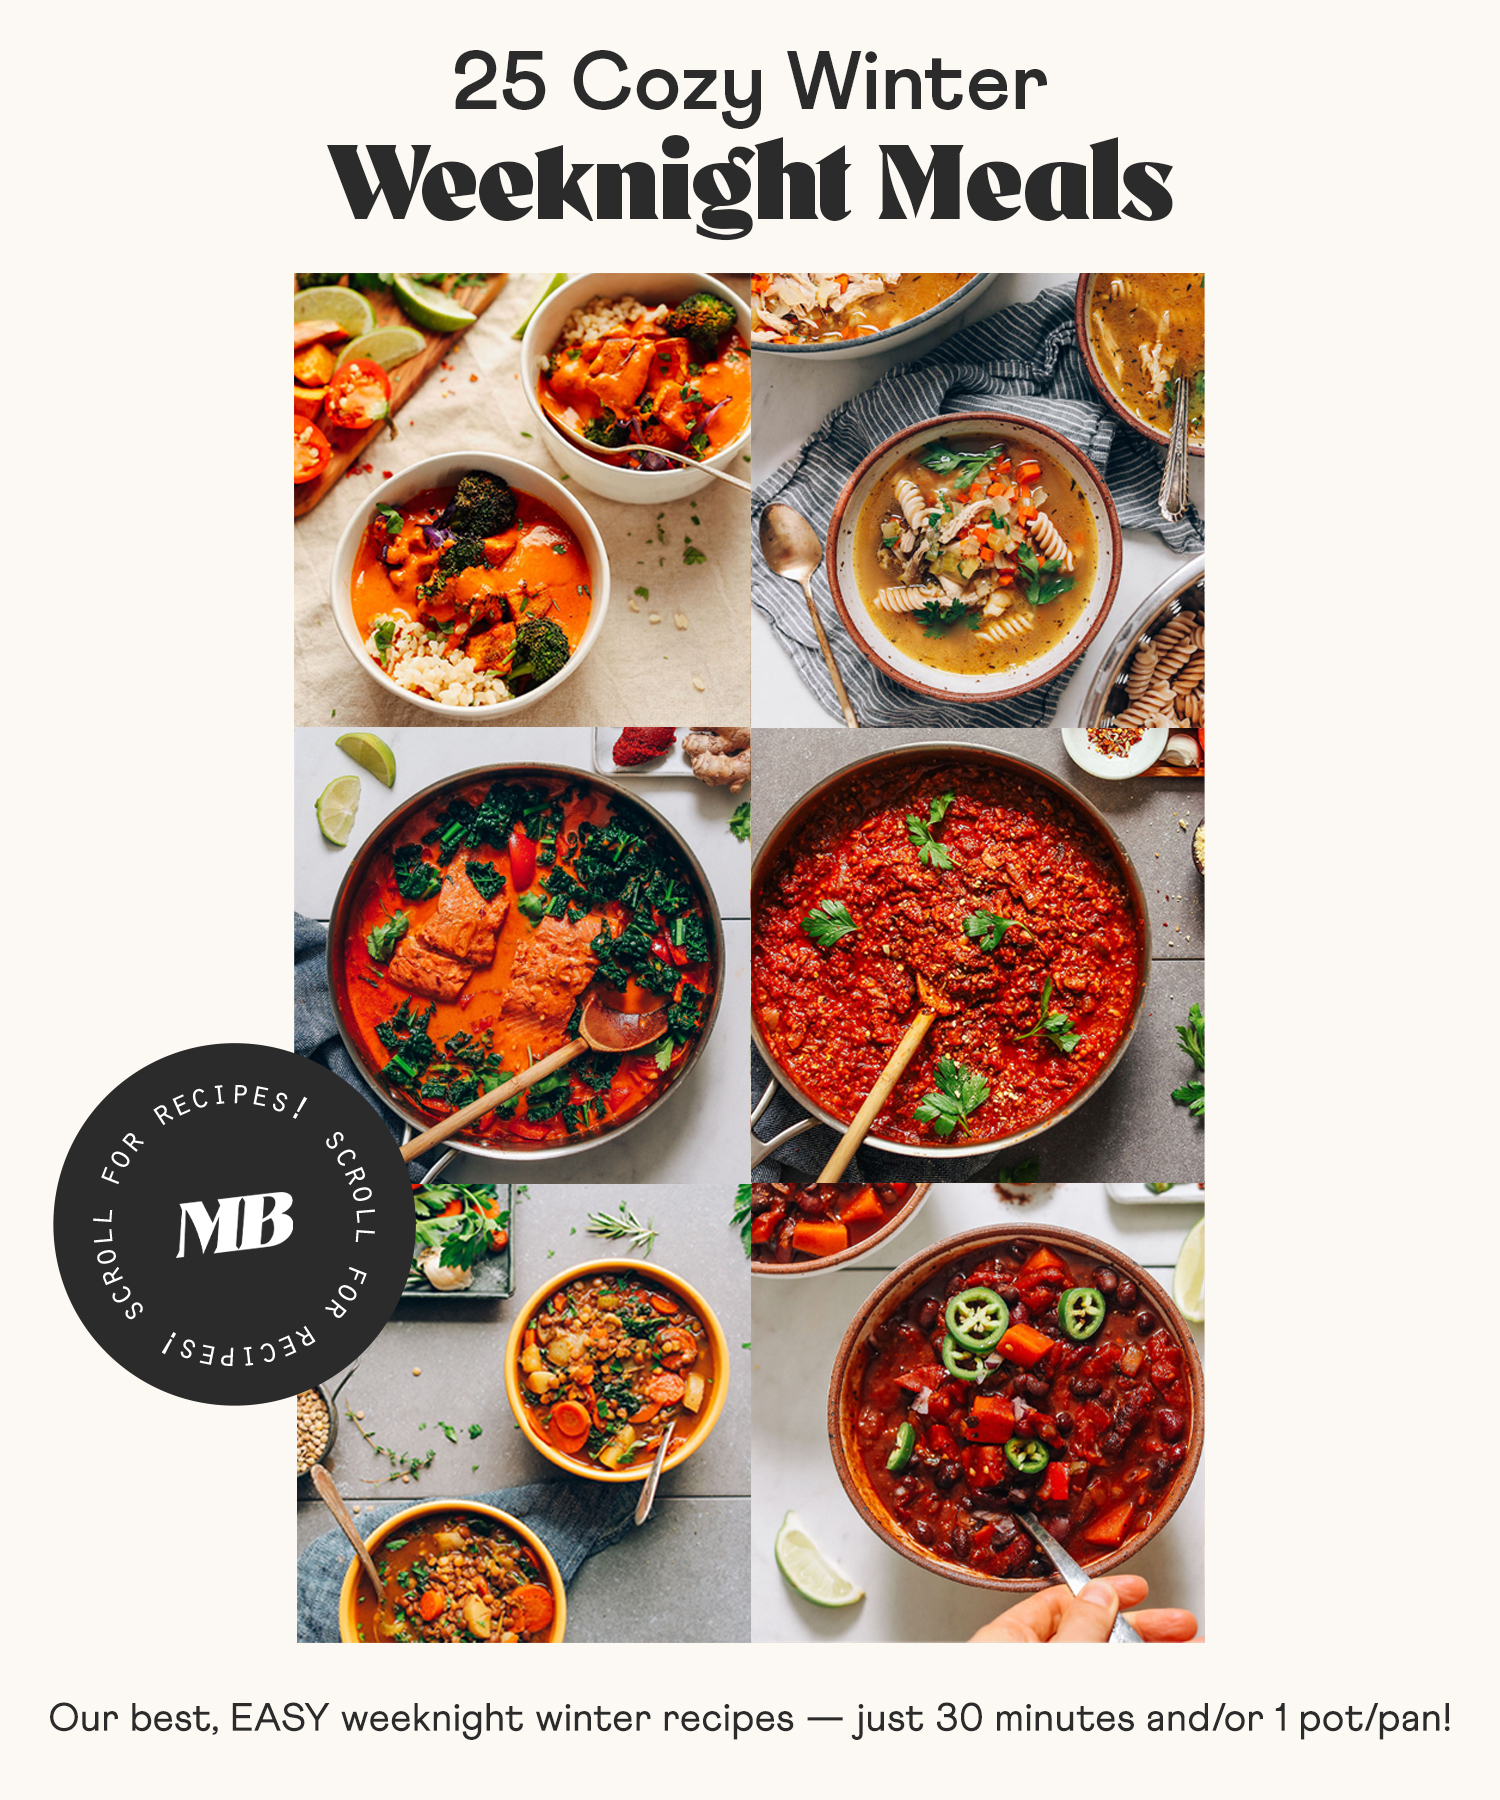 Photos of curries, soups, chili, and bolognese with text saying 25 cozy winter weeknight meals